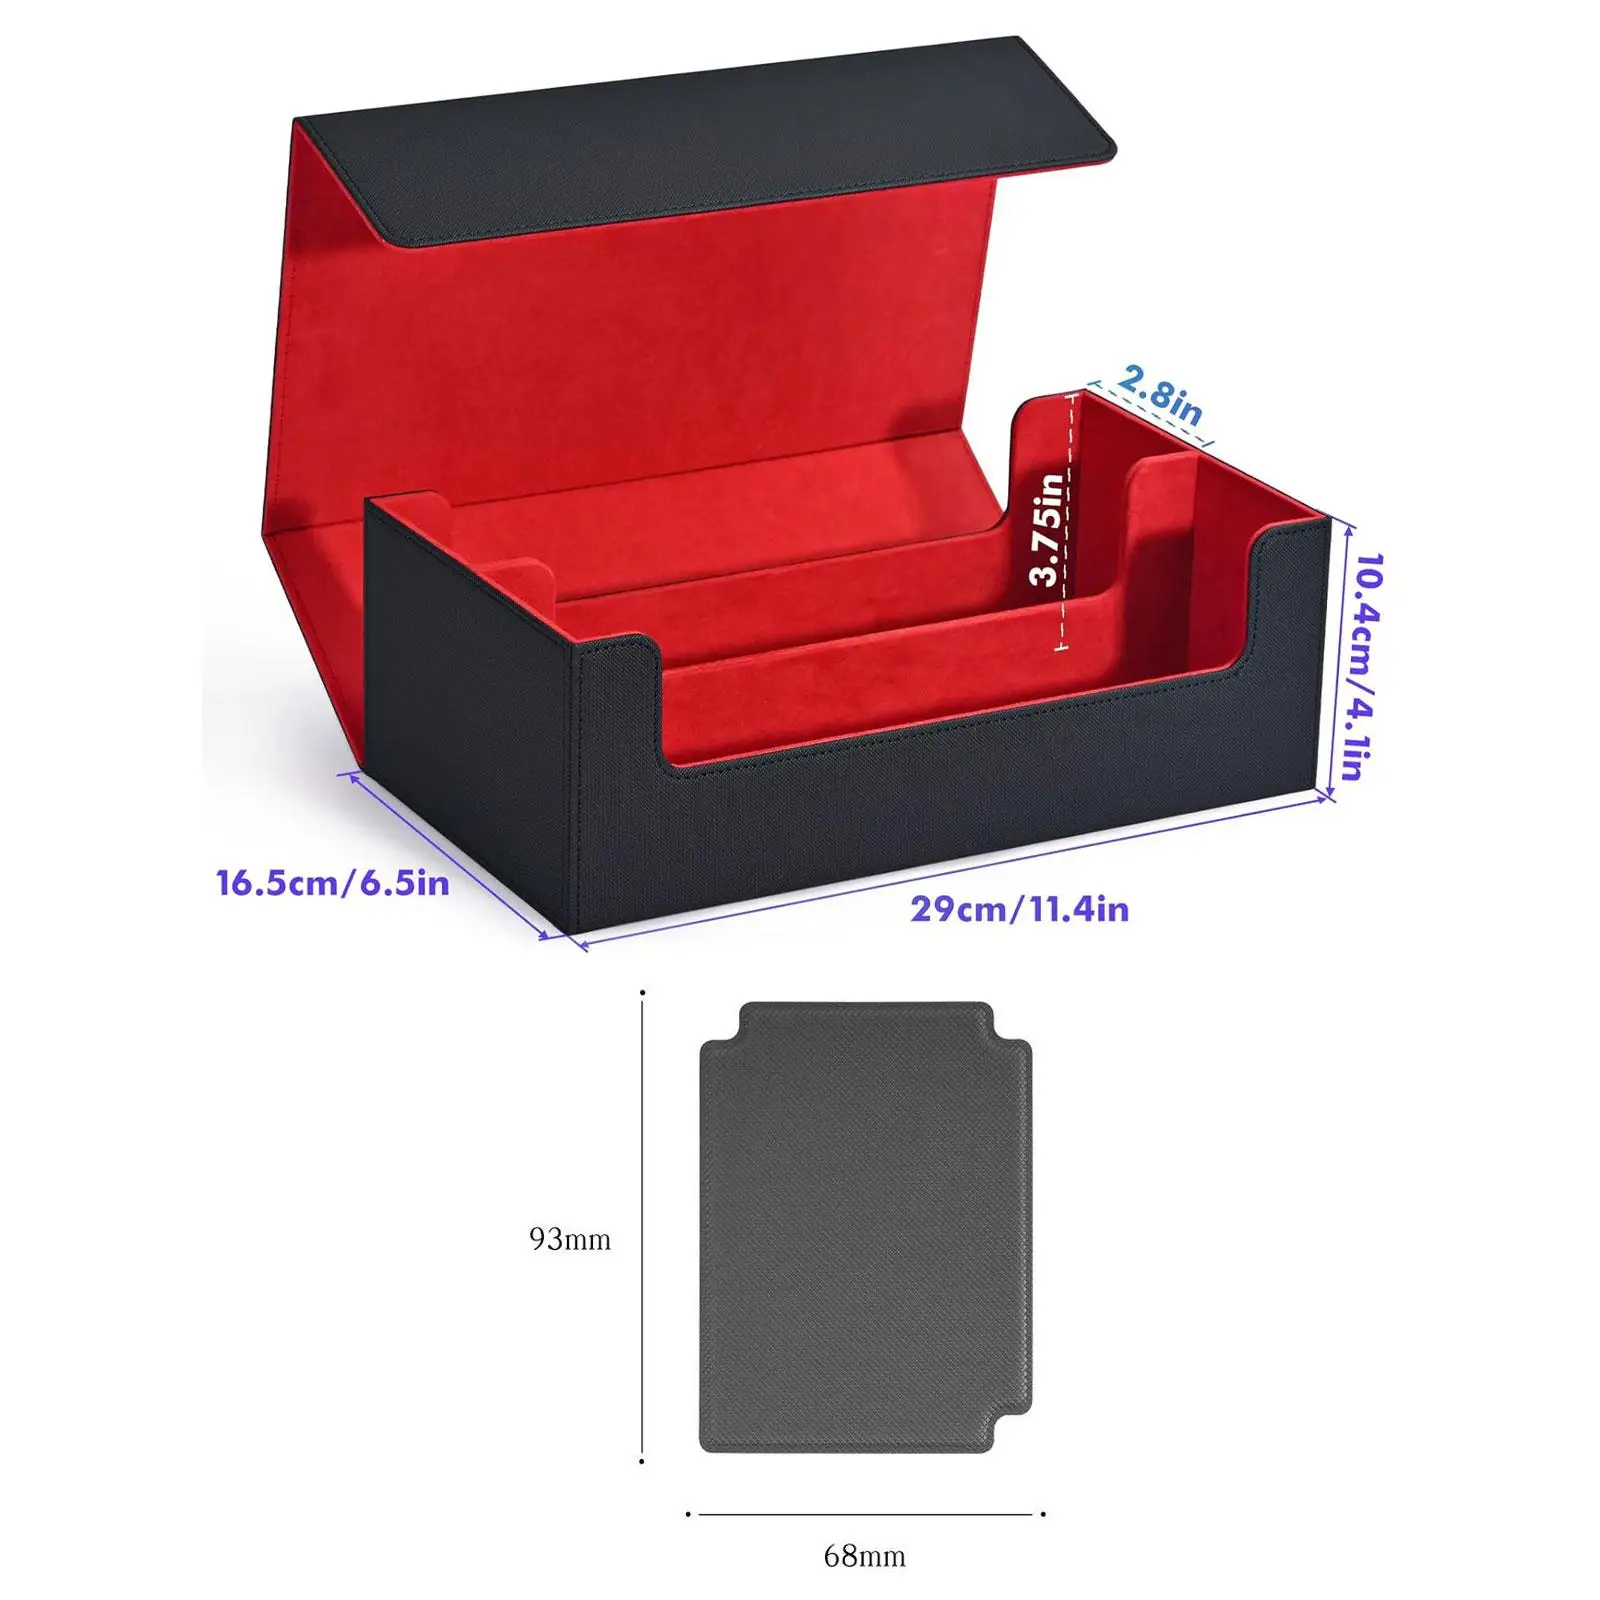 Card Deck Box Container Standard Magnetics Closure Gathering Card Toy Can Holds 1200+ Cards Premium PU Leather Game Card Storage